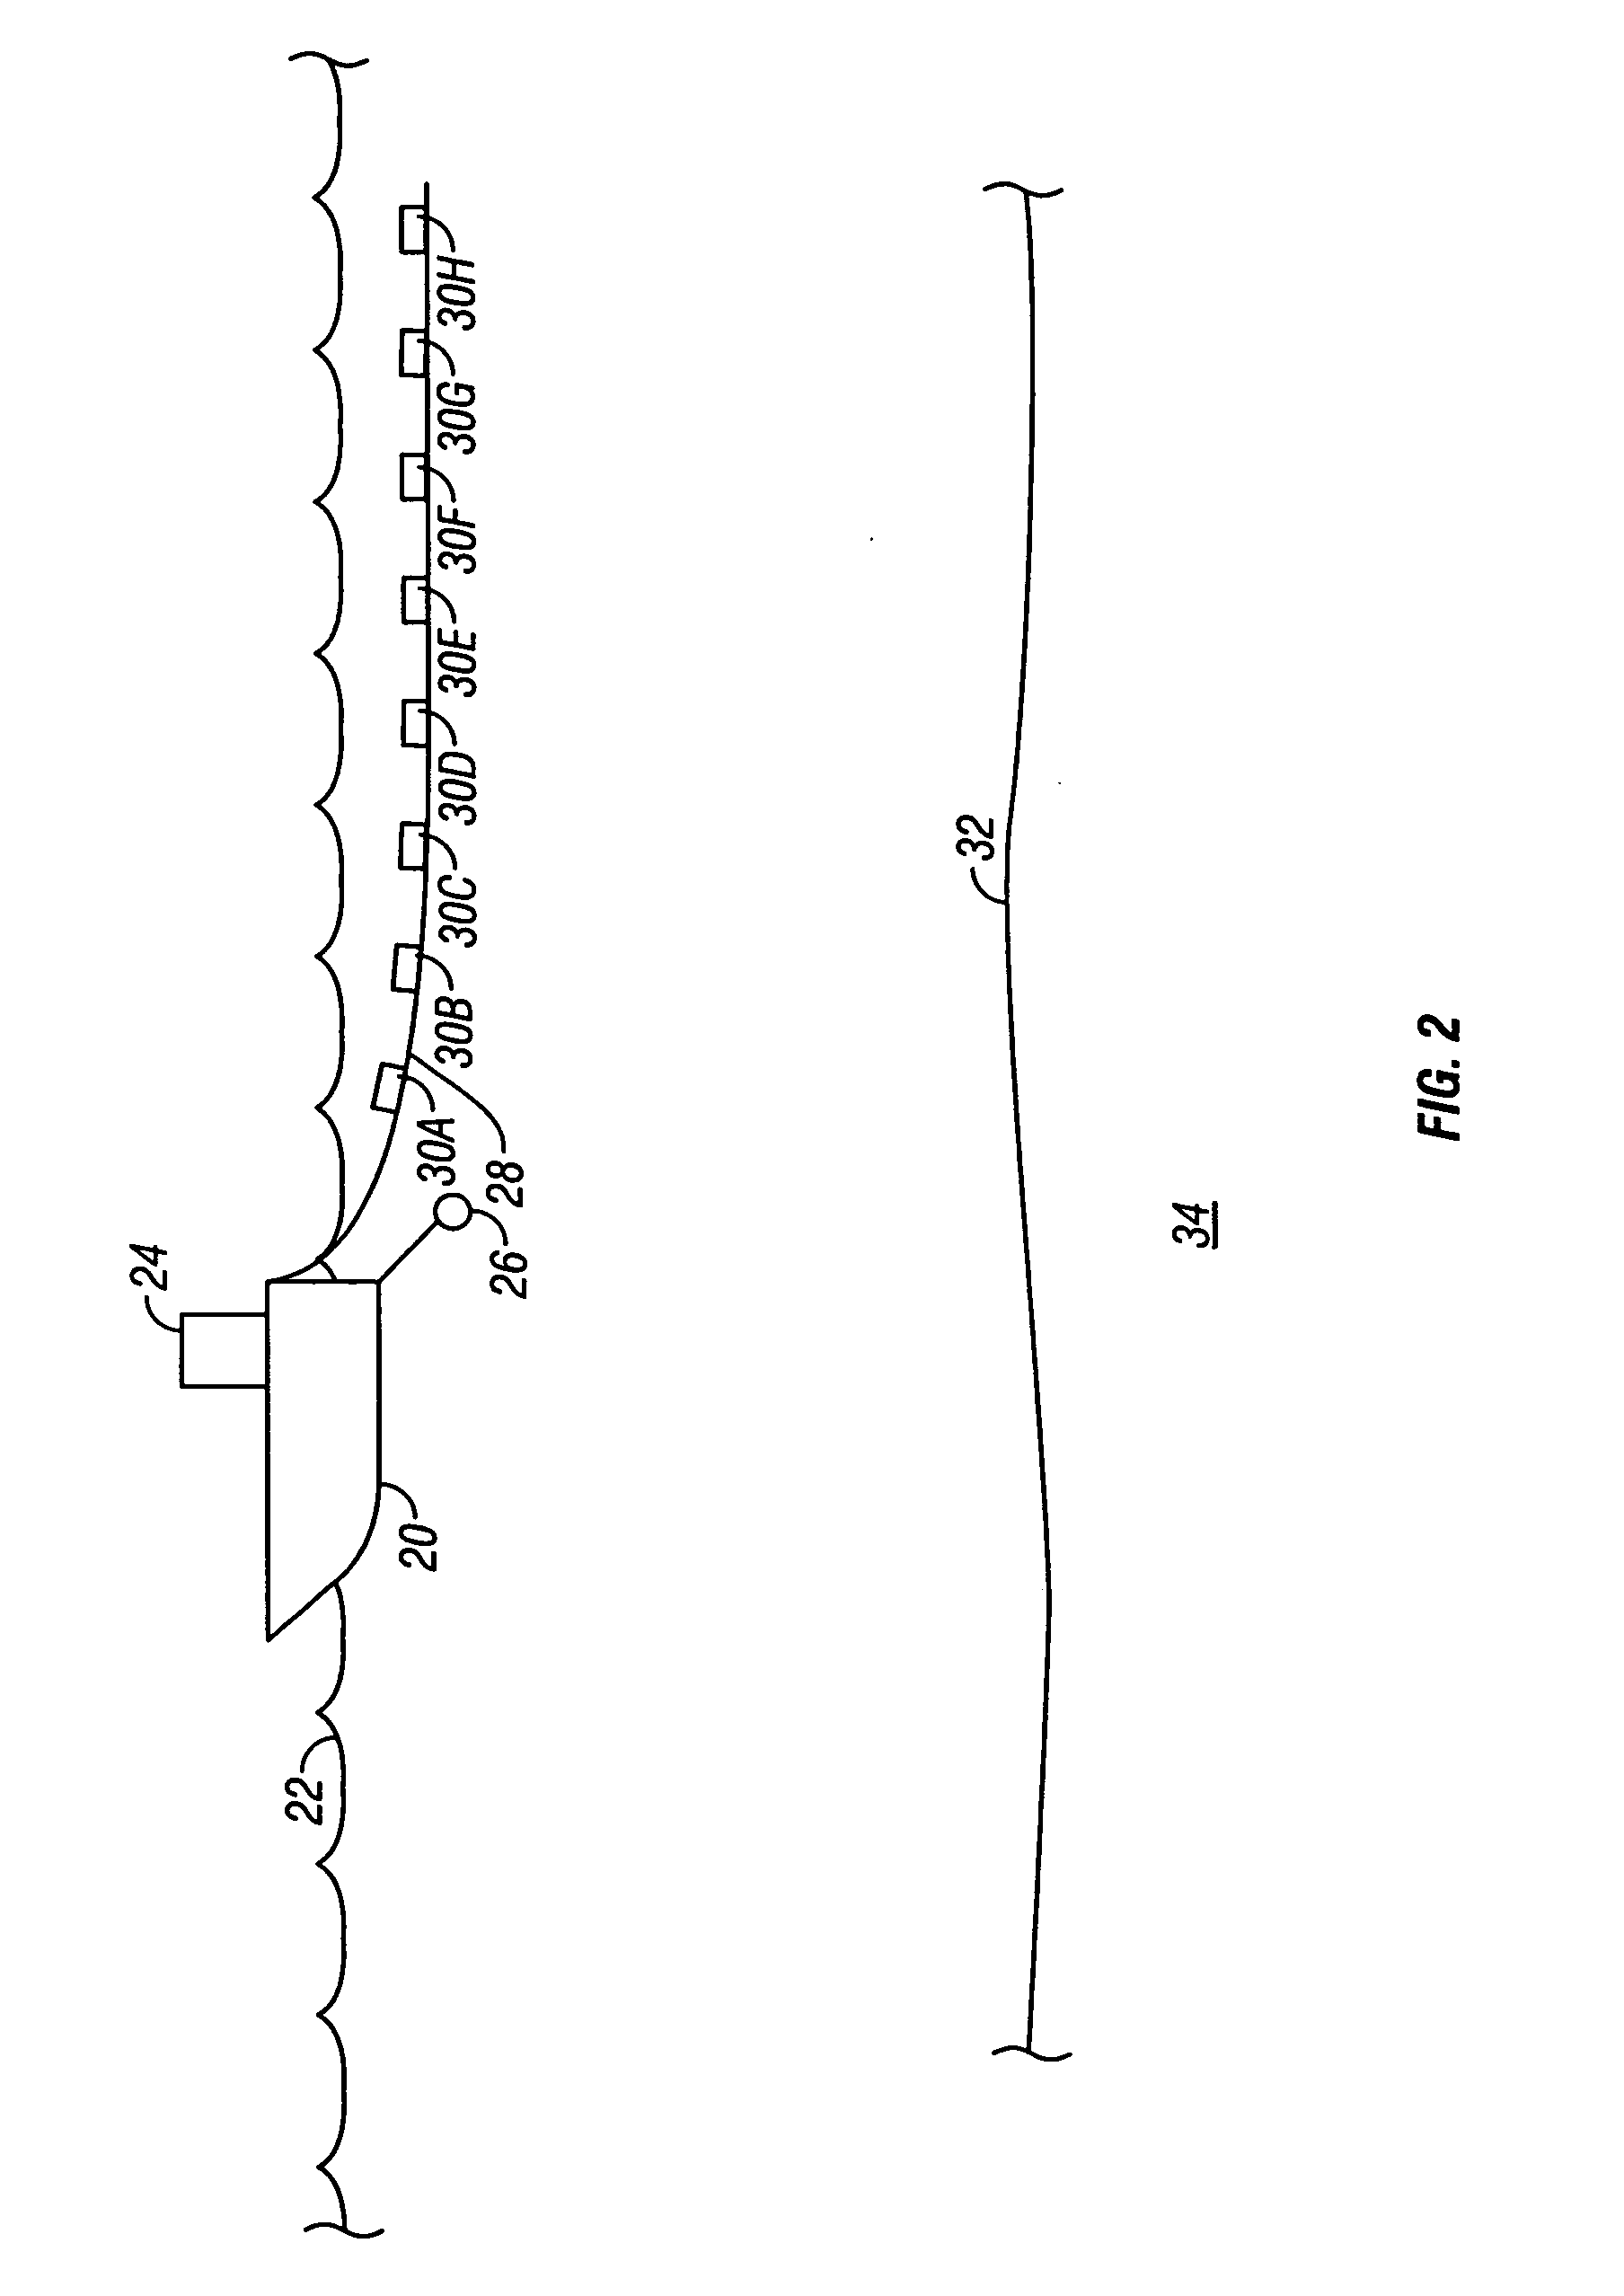 Frequency division and/or wavelength division multiplexed recursive fiber optic telemetry scheme for an optical sensor array